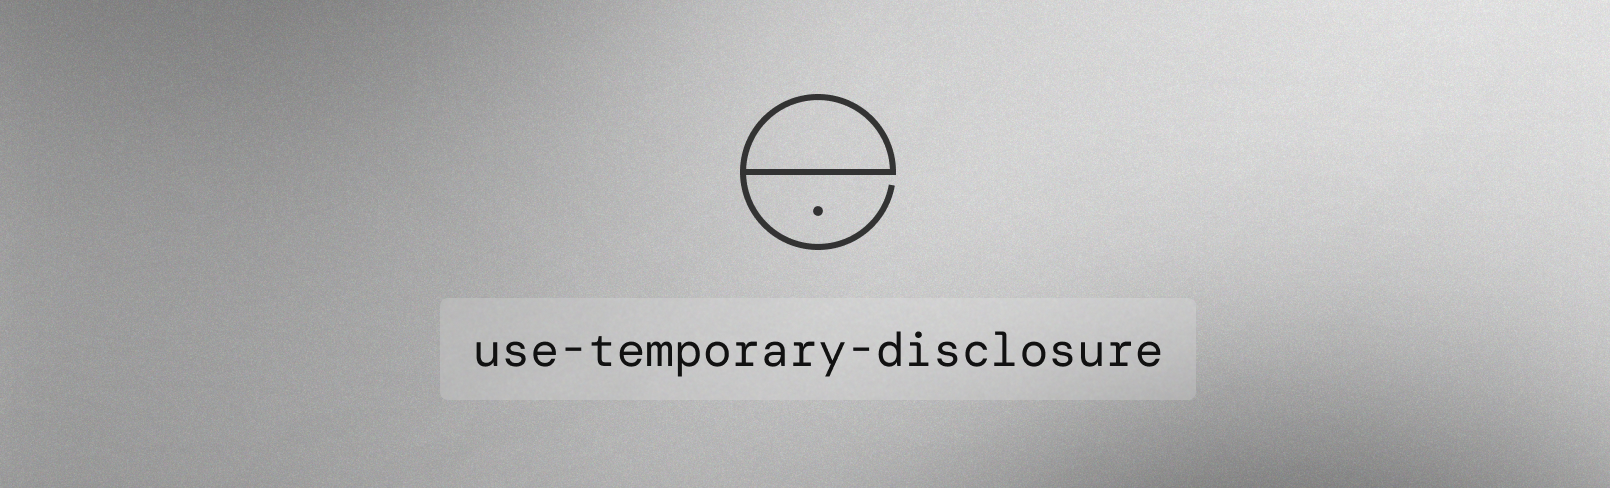 use-temporary-disclosure-banner